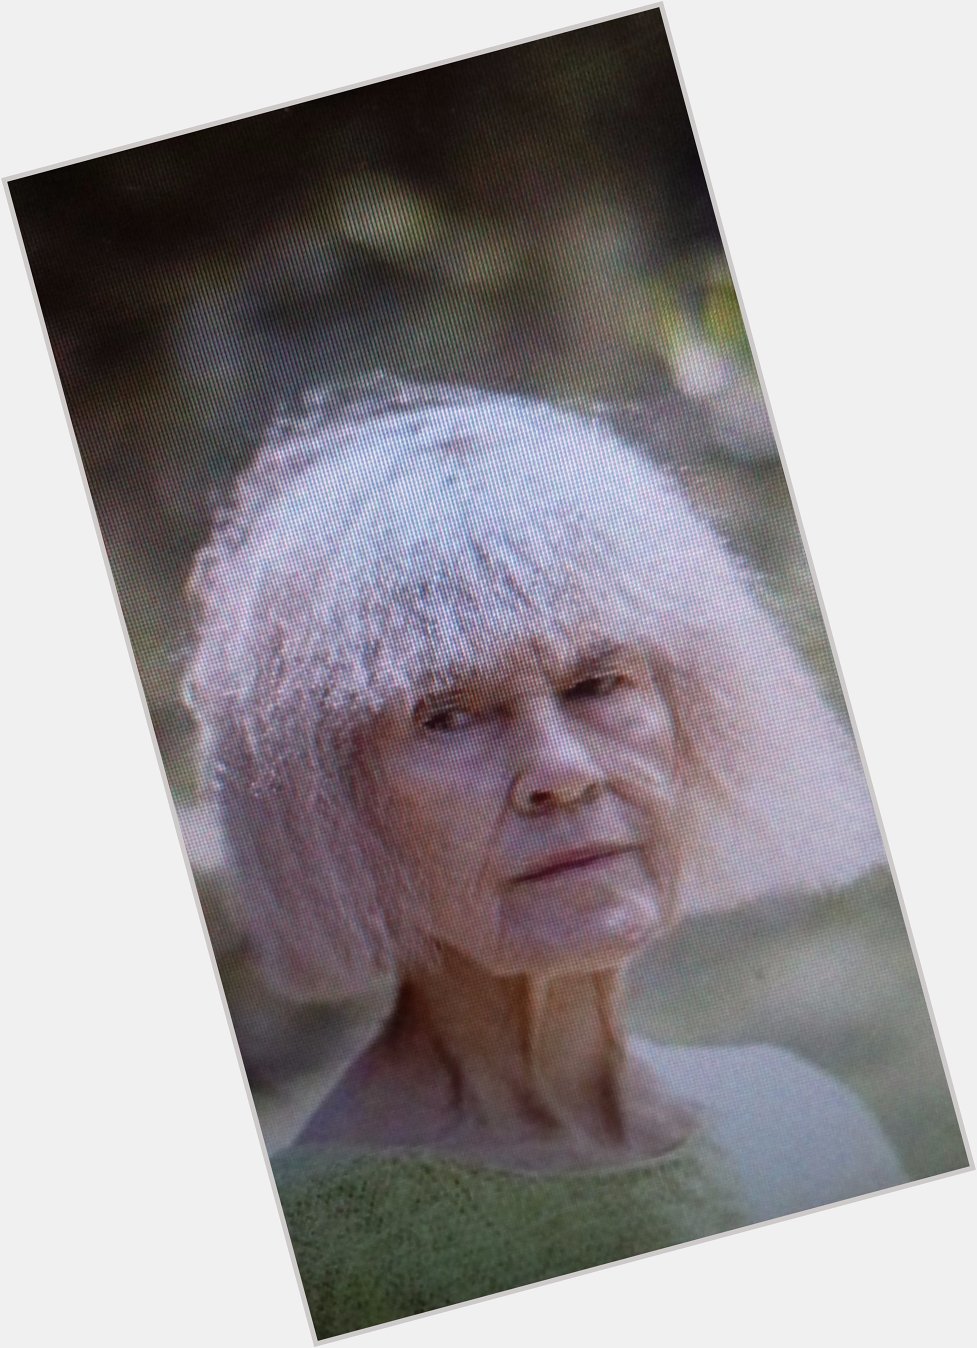 Happy birthday to two amazing composers- Carla Bley and Judith Weir. Cupla tunes tonight. 